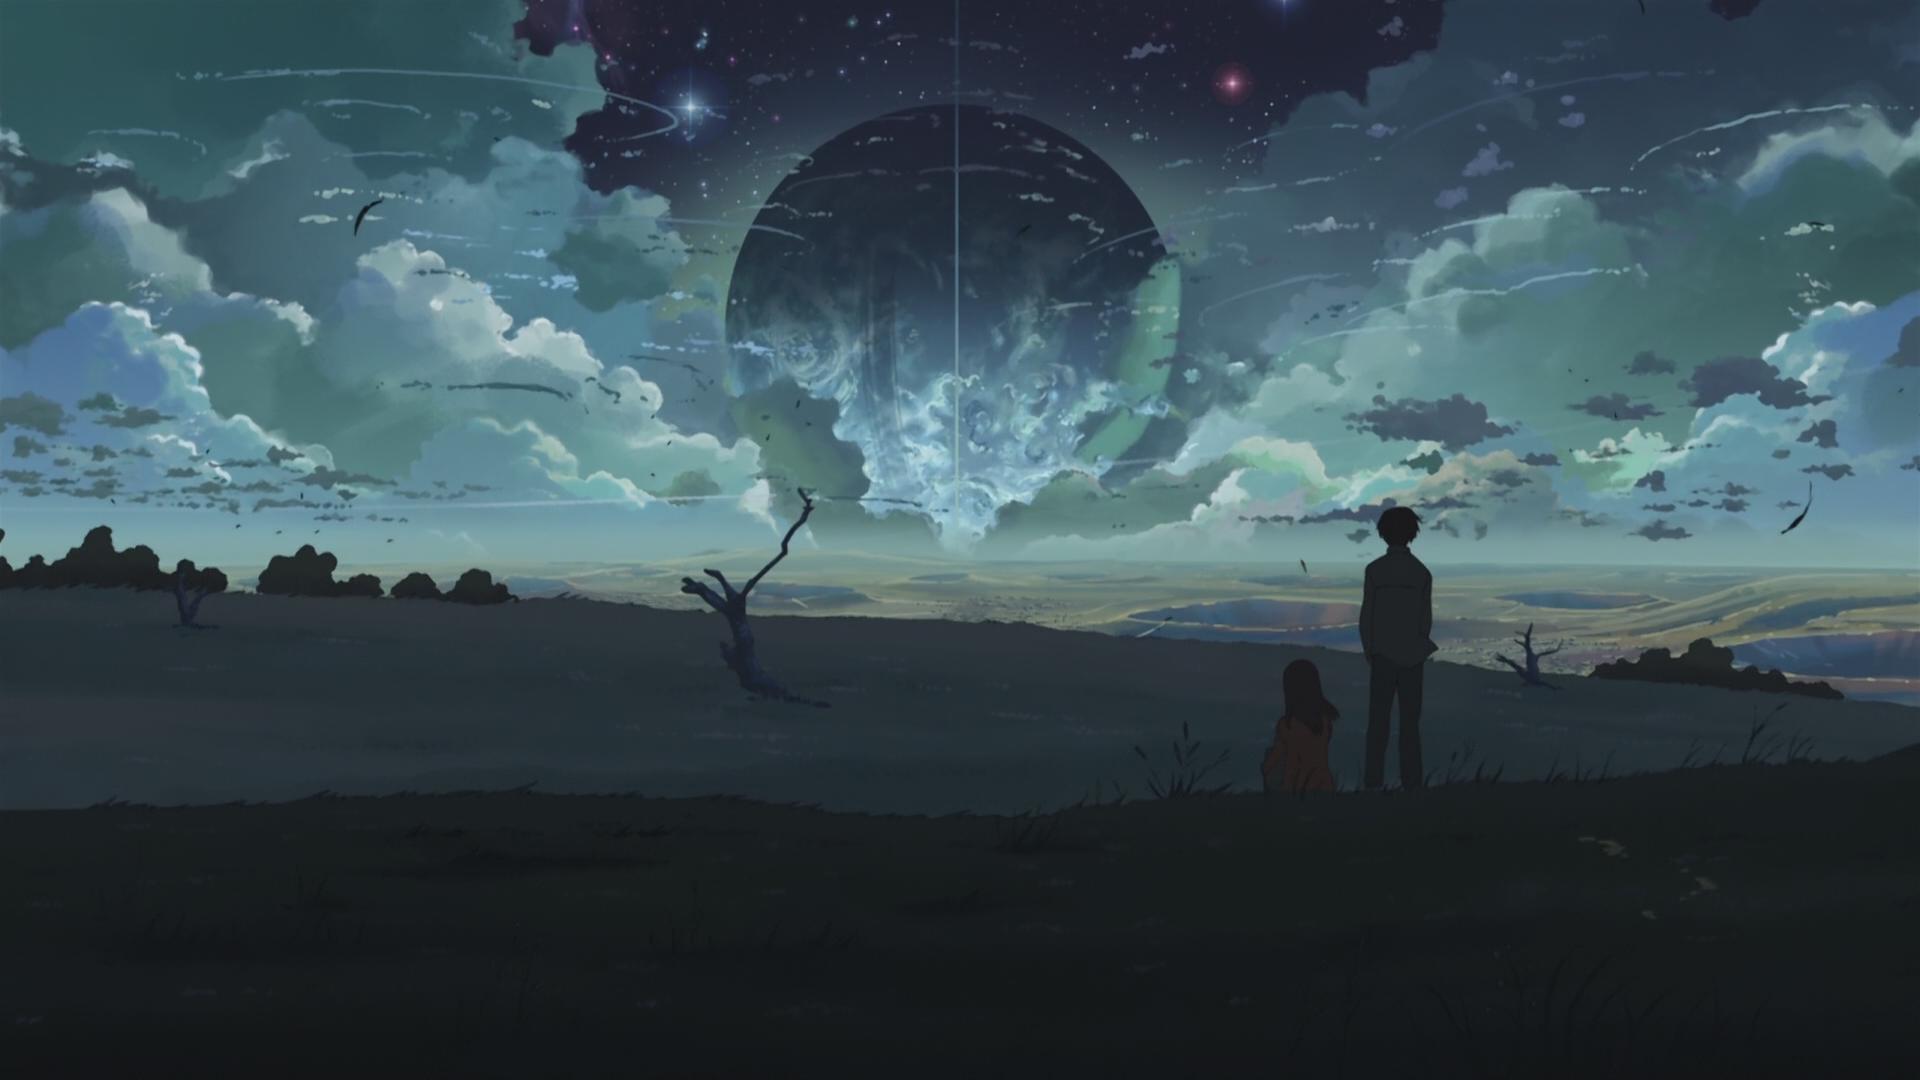 Makoto Shinkai, 5 Centimeters Per Second, The Place Promised in Our Early Days - desktop wallpaper